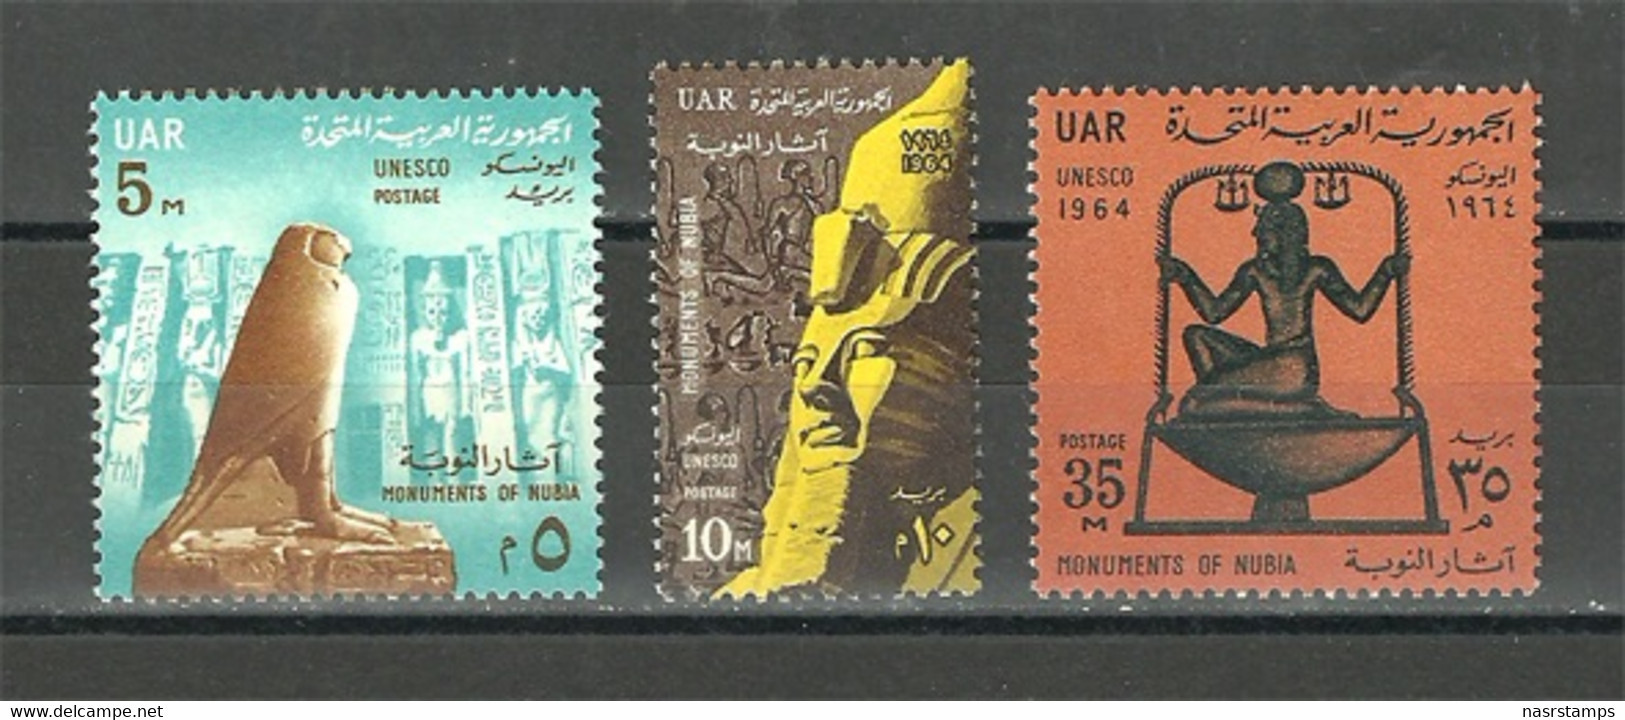 Egypt - 1964 - ( “Save The Monuments Of Nubia” Campaign ) - MNH (**) - Egyptologie